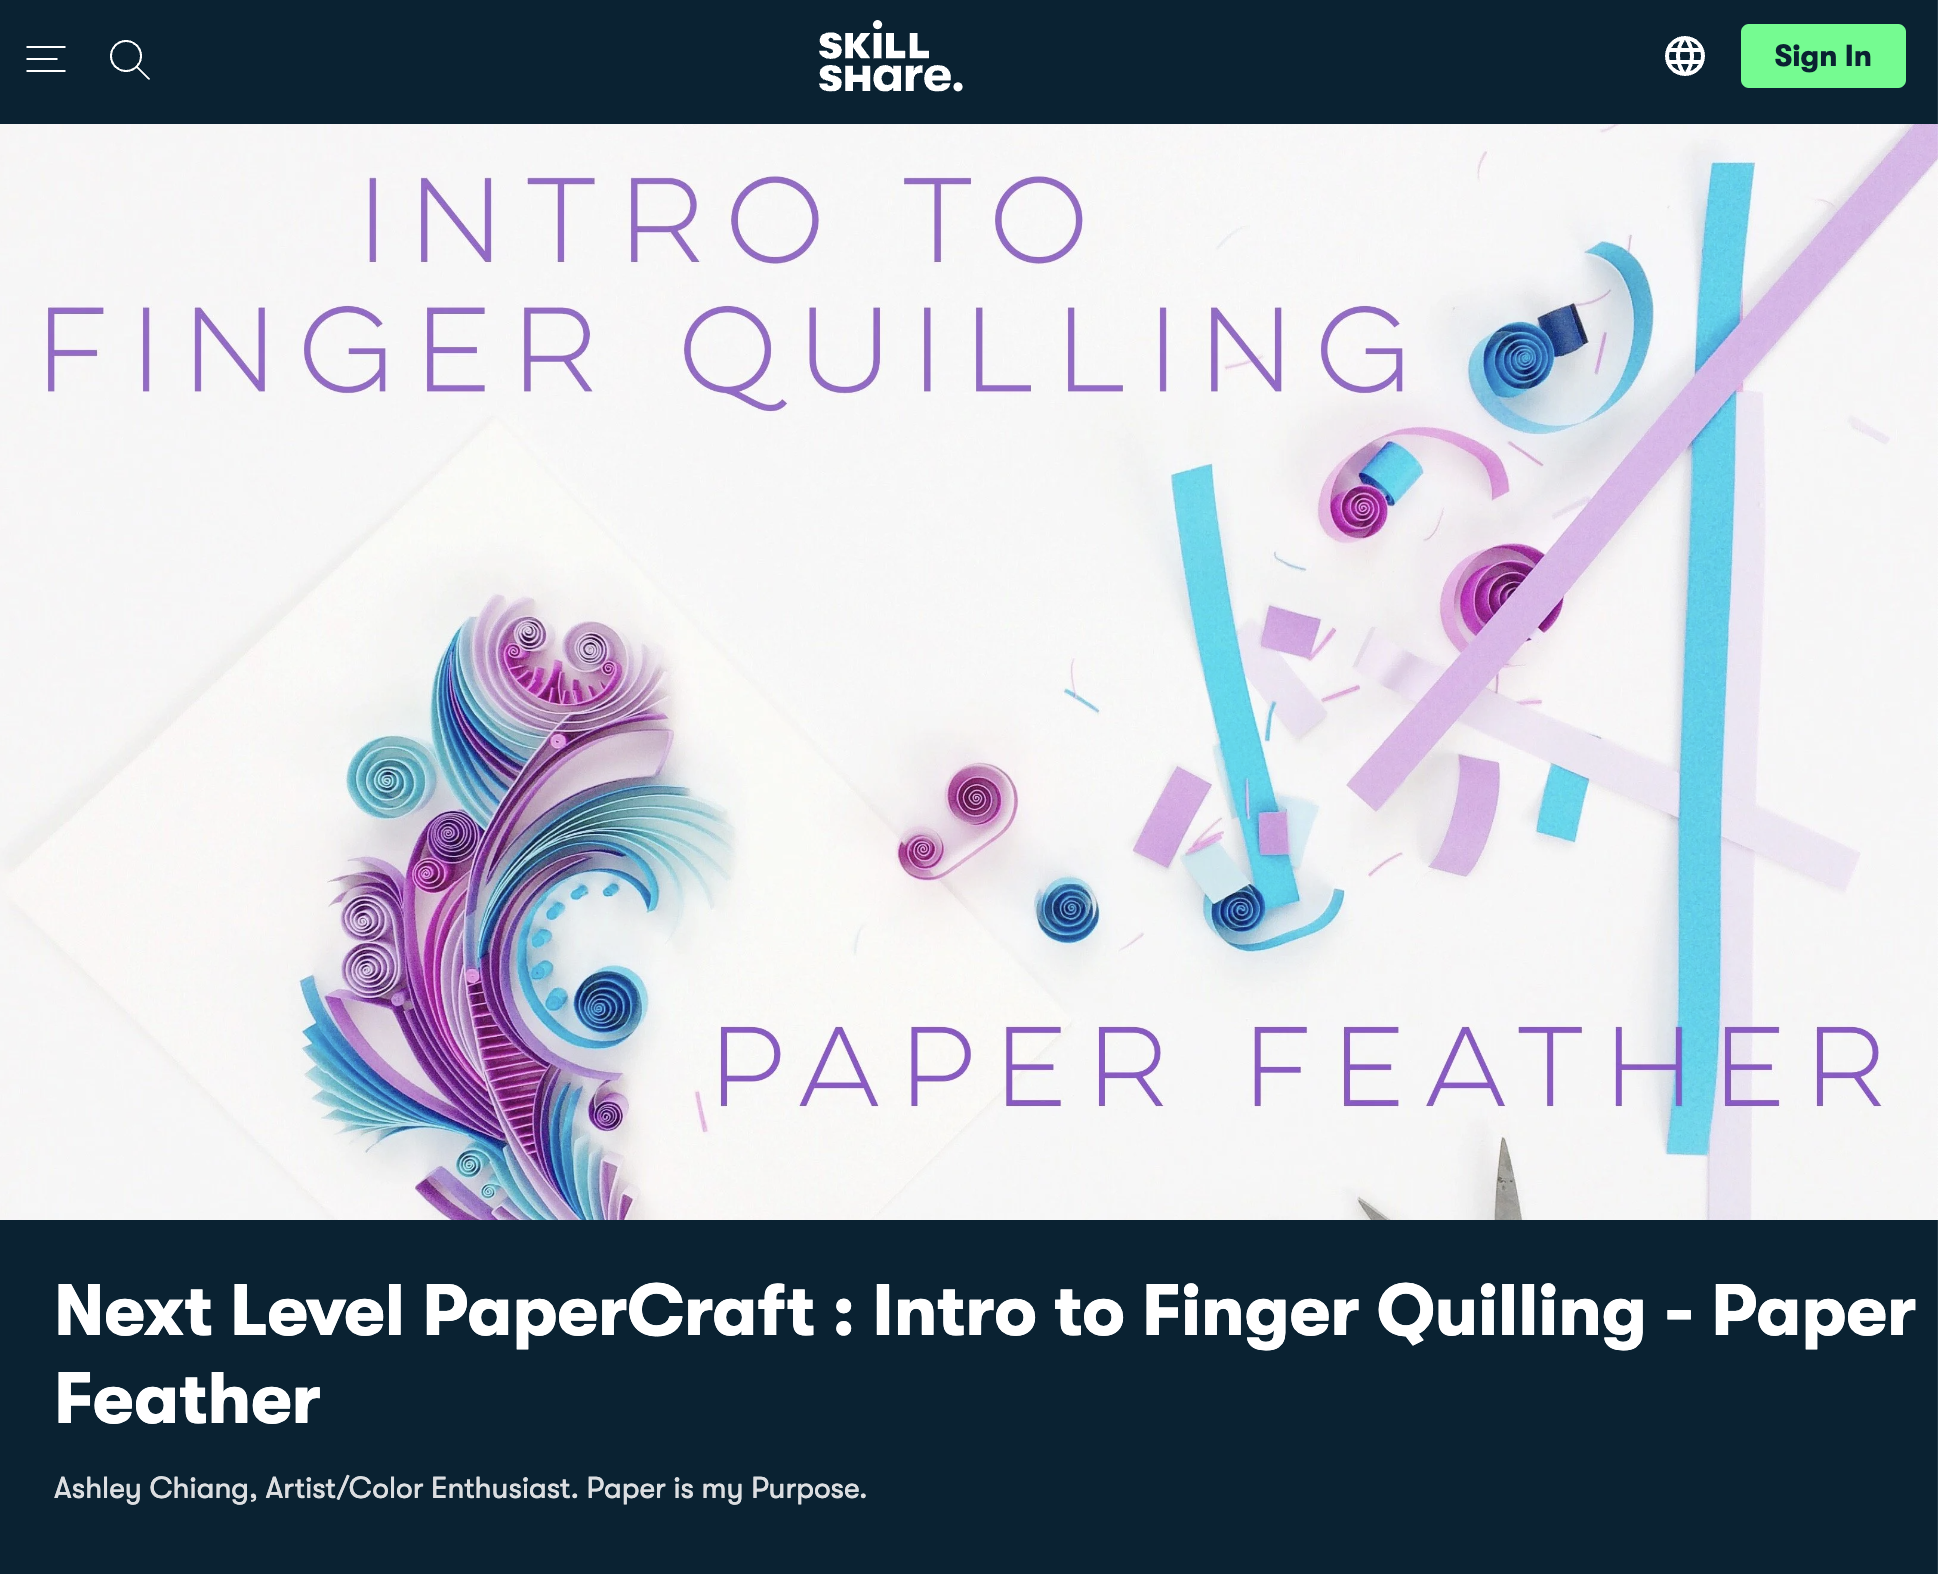 Next Level PaperCraft Intro to Finger Quilling